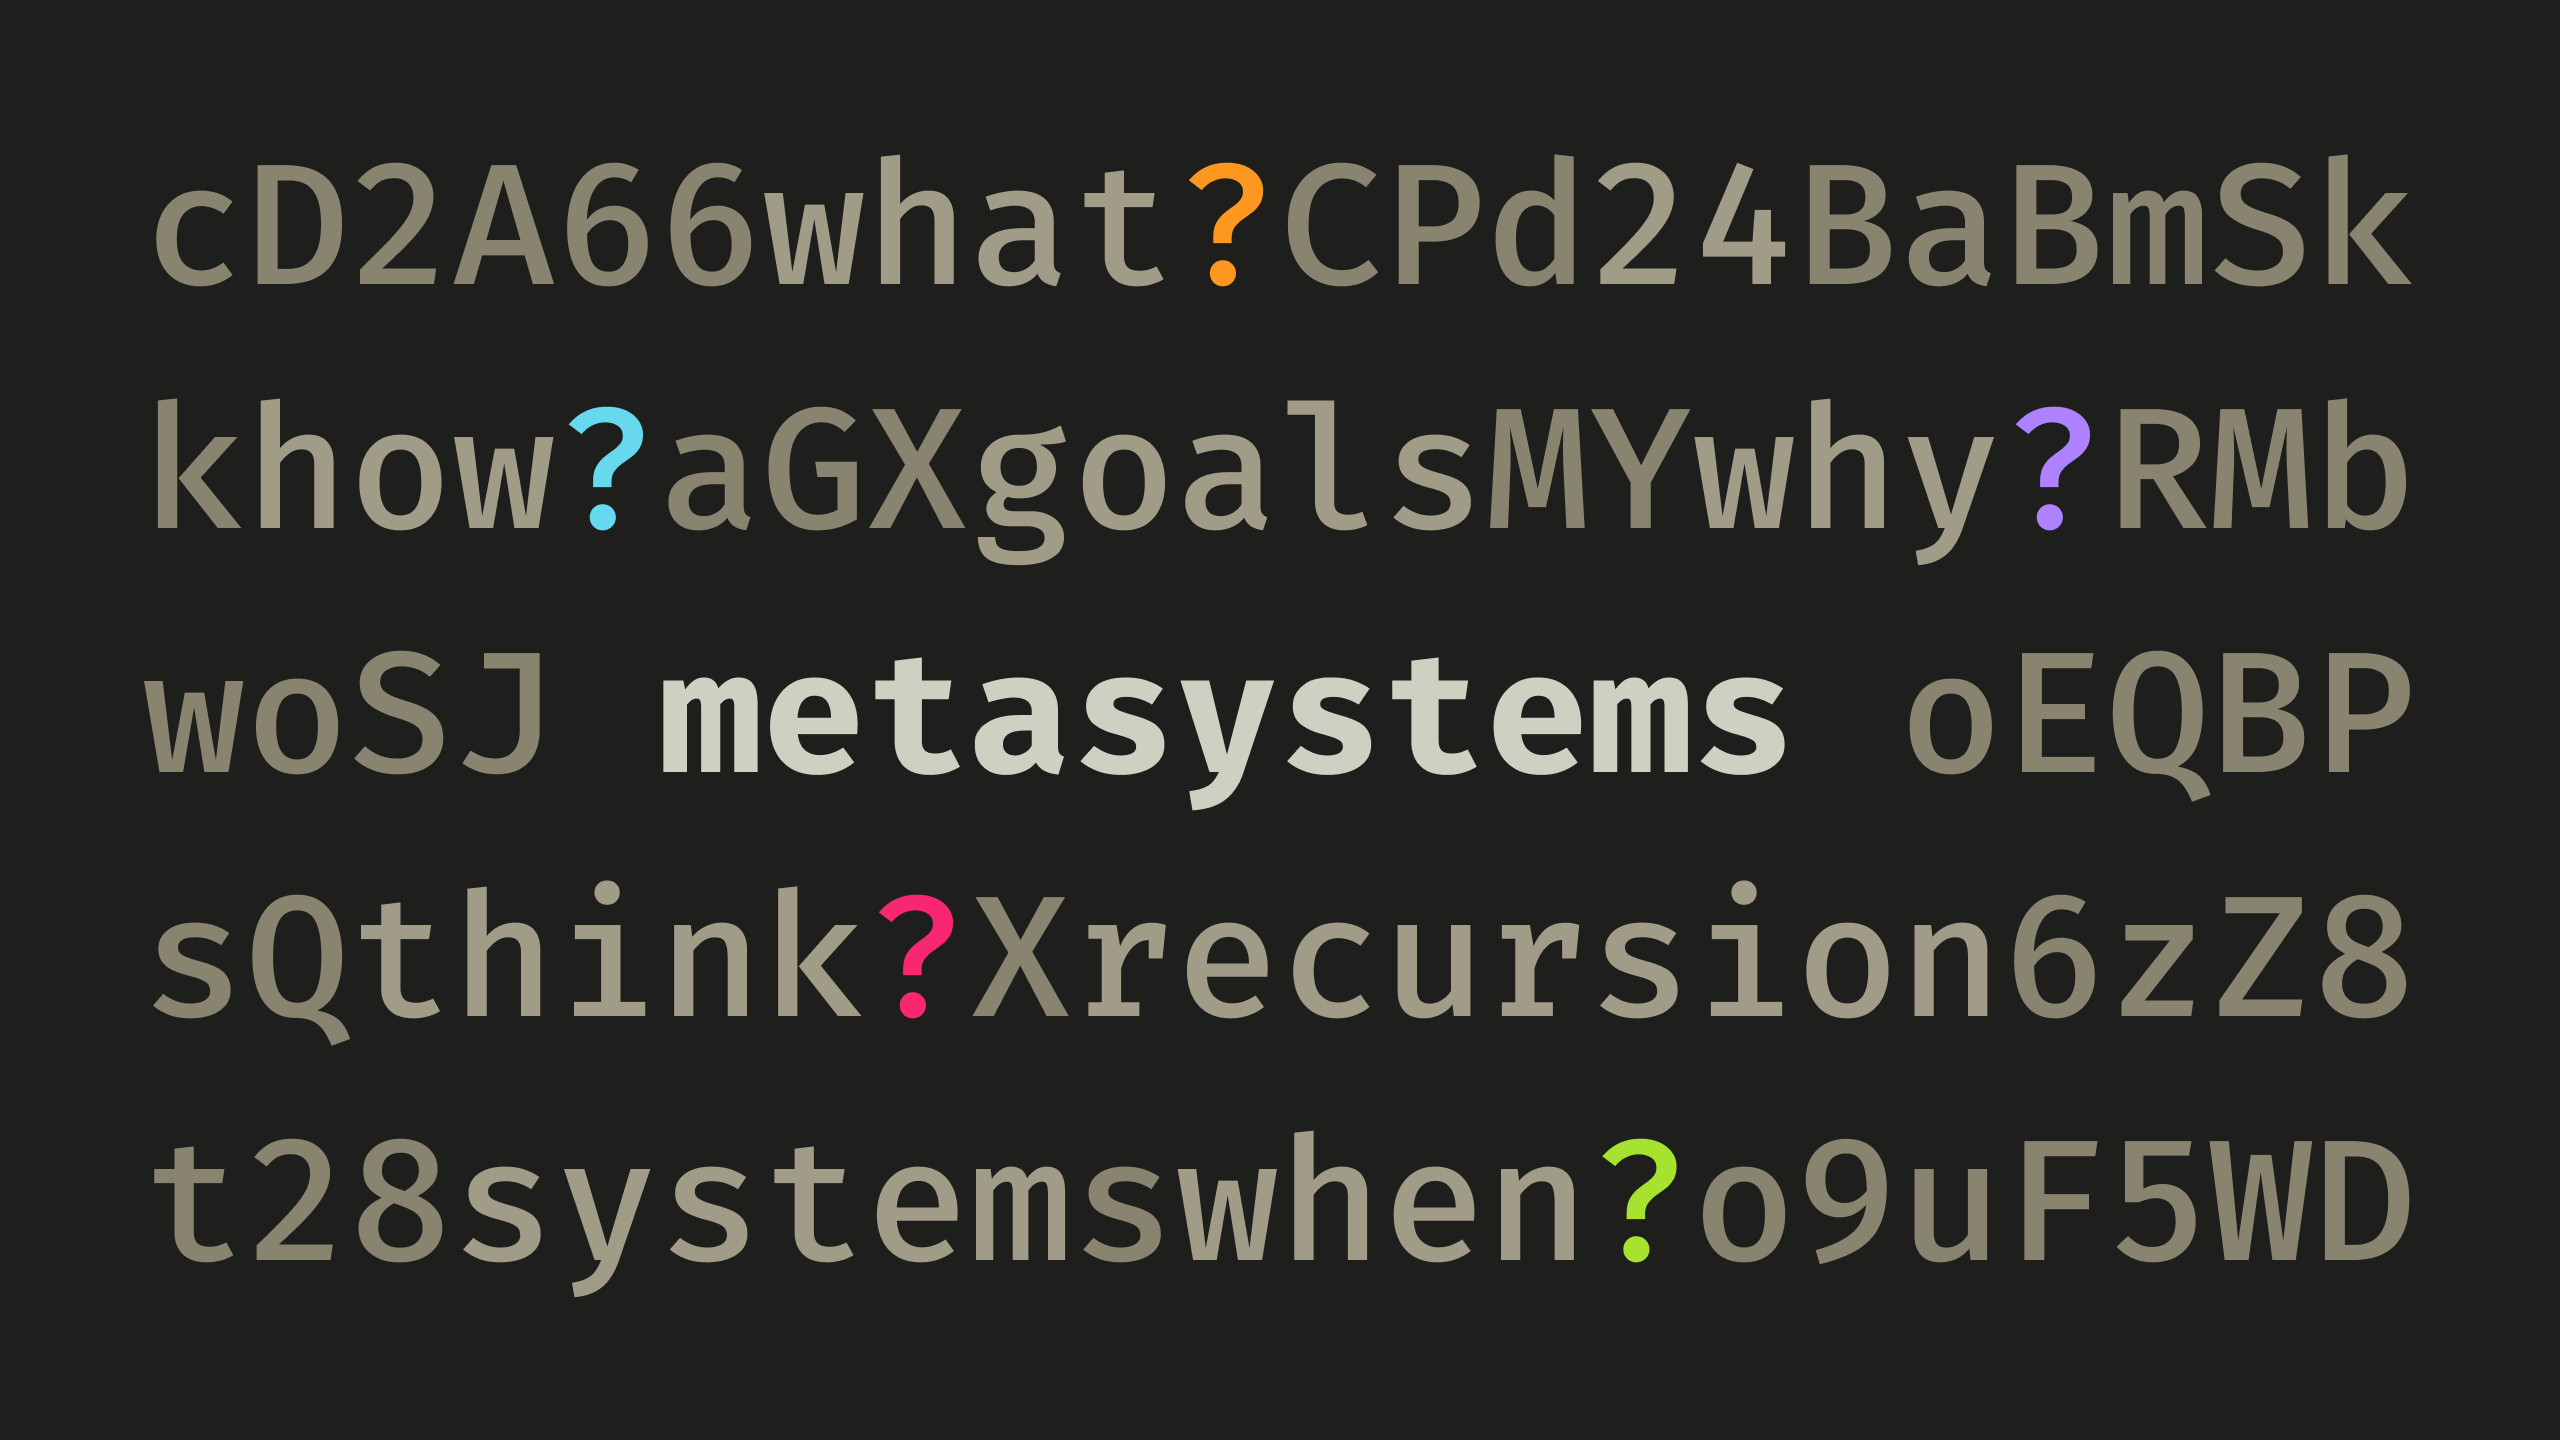 The word "metasystems" surrounded by (mostly) random characters.